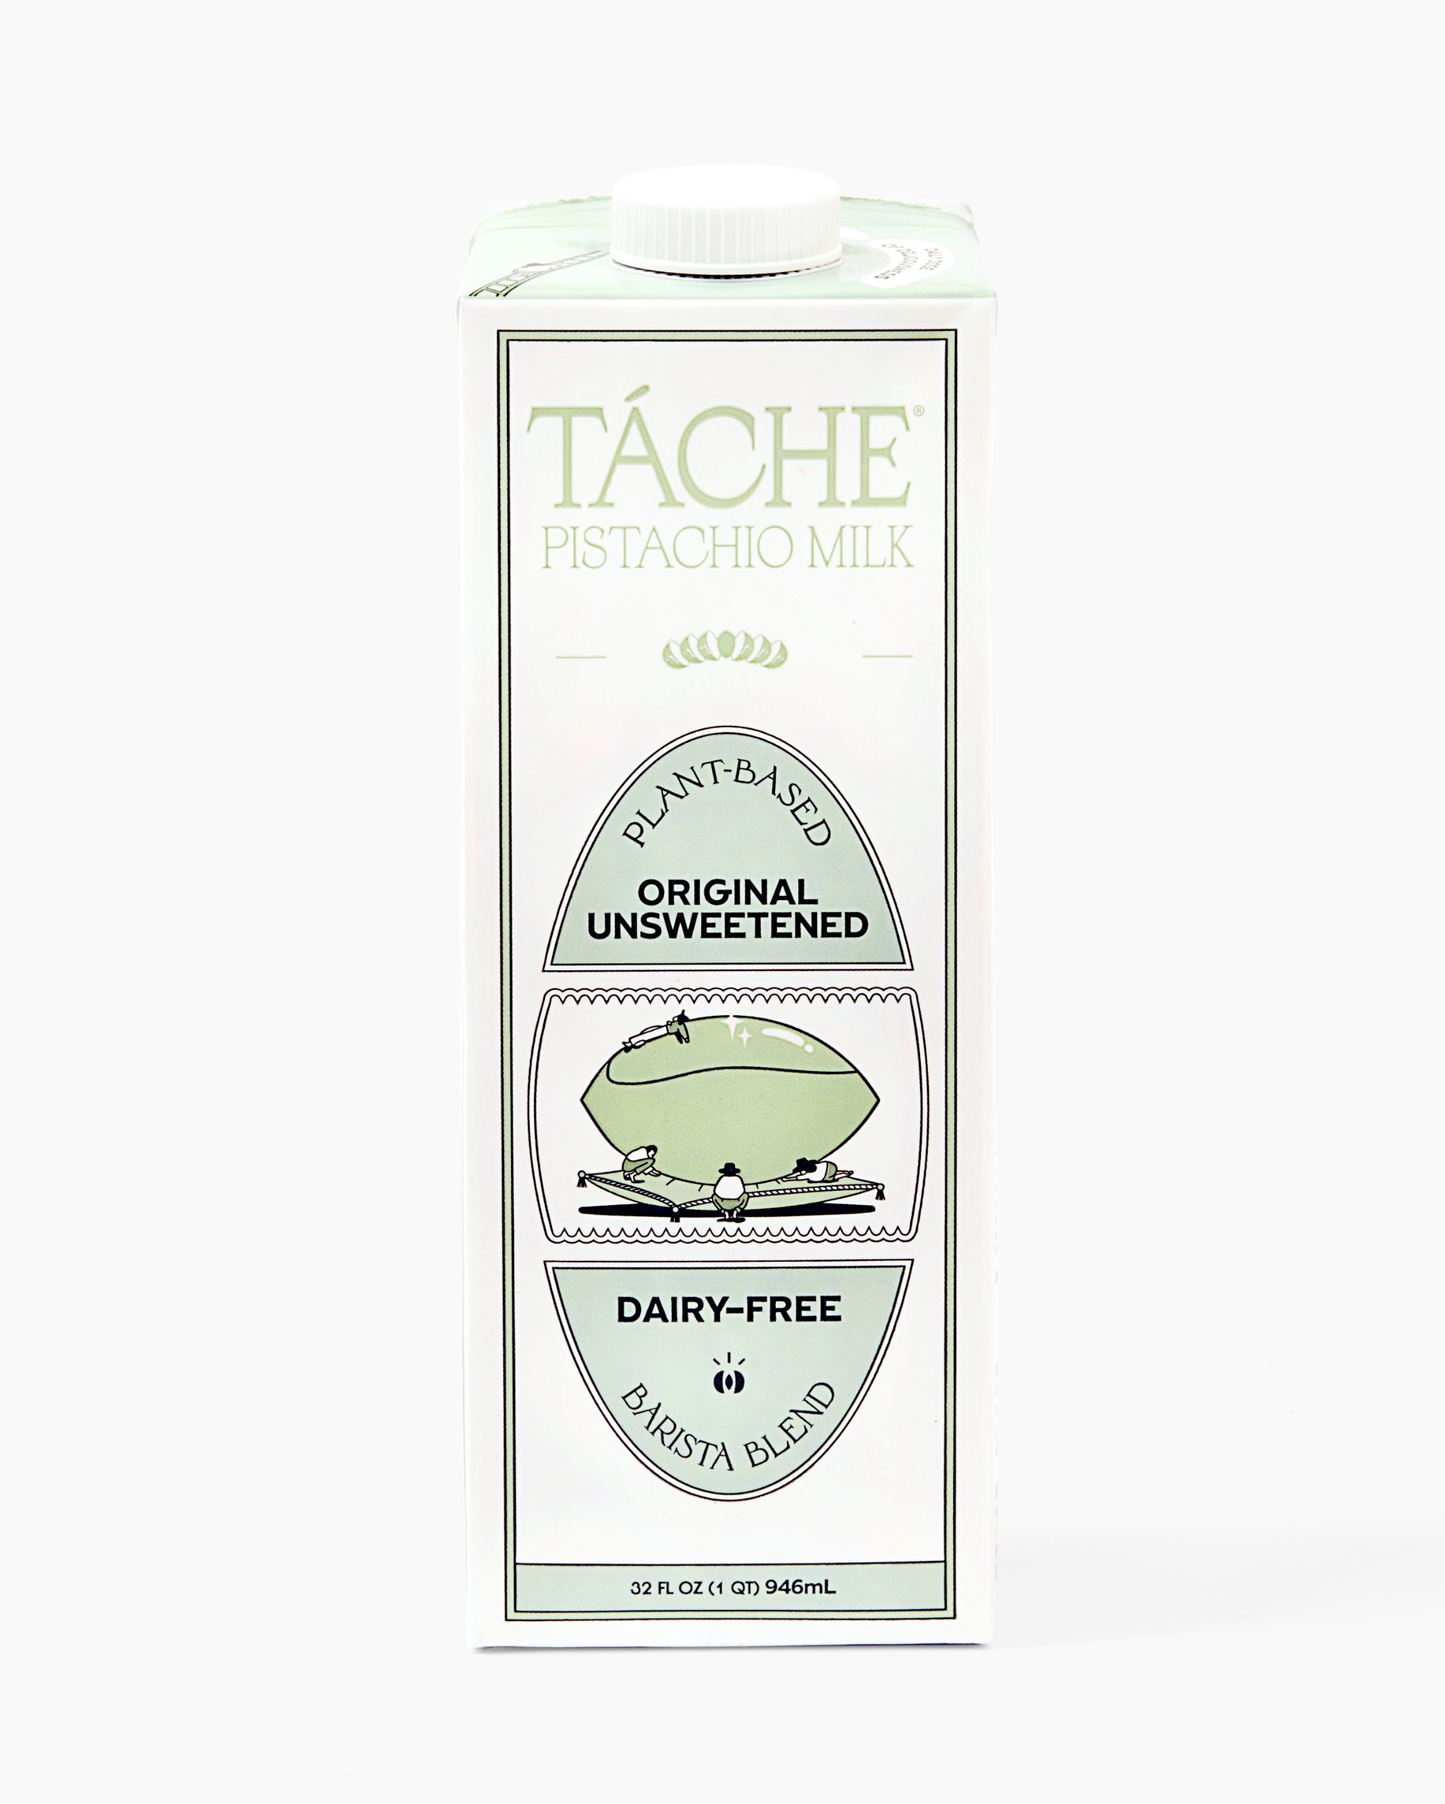 Táche Unsweetened Original Blend